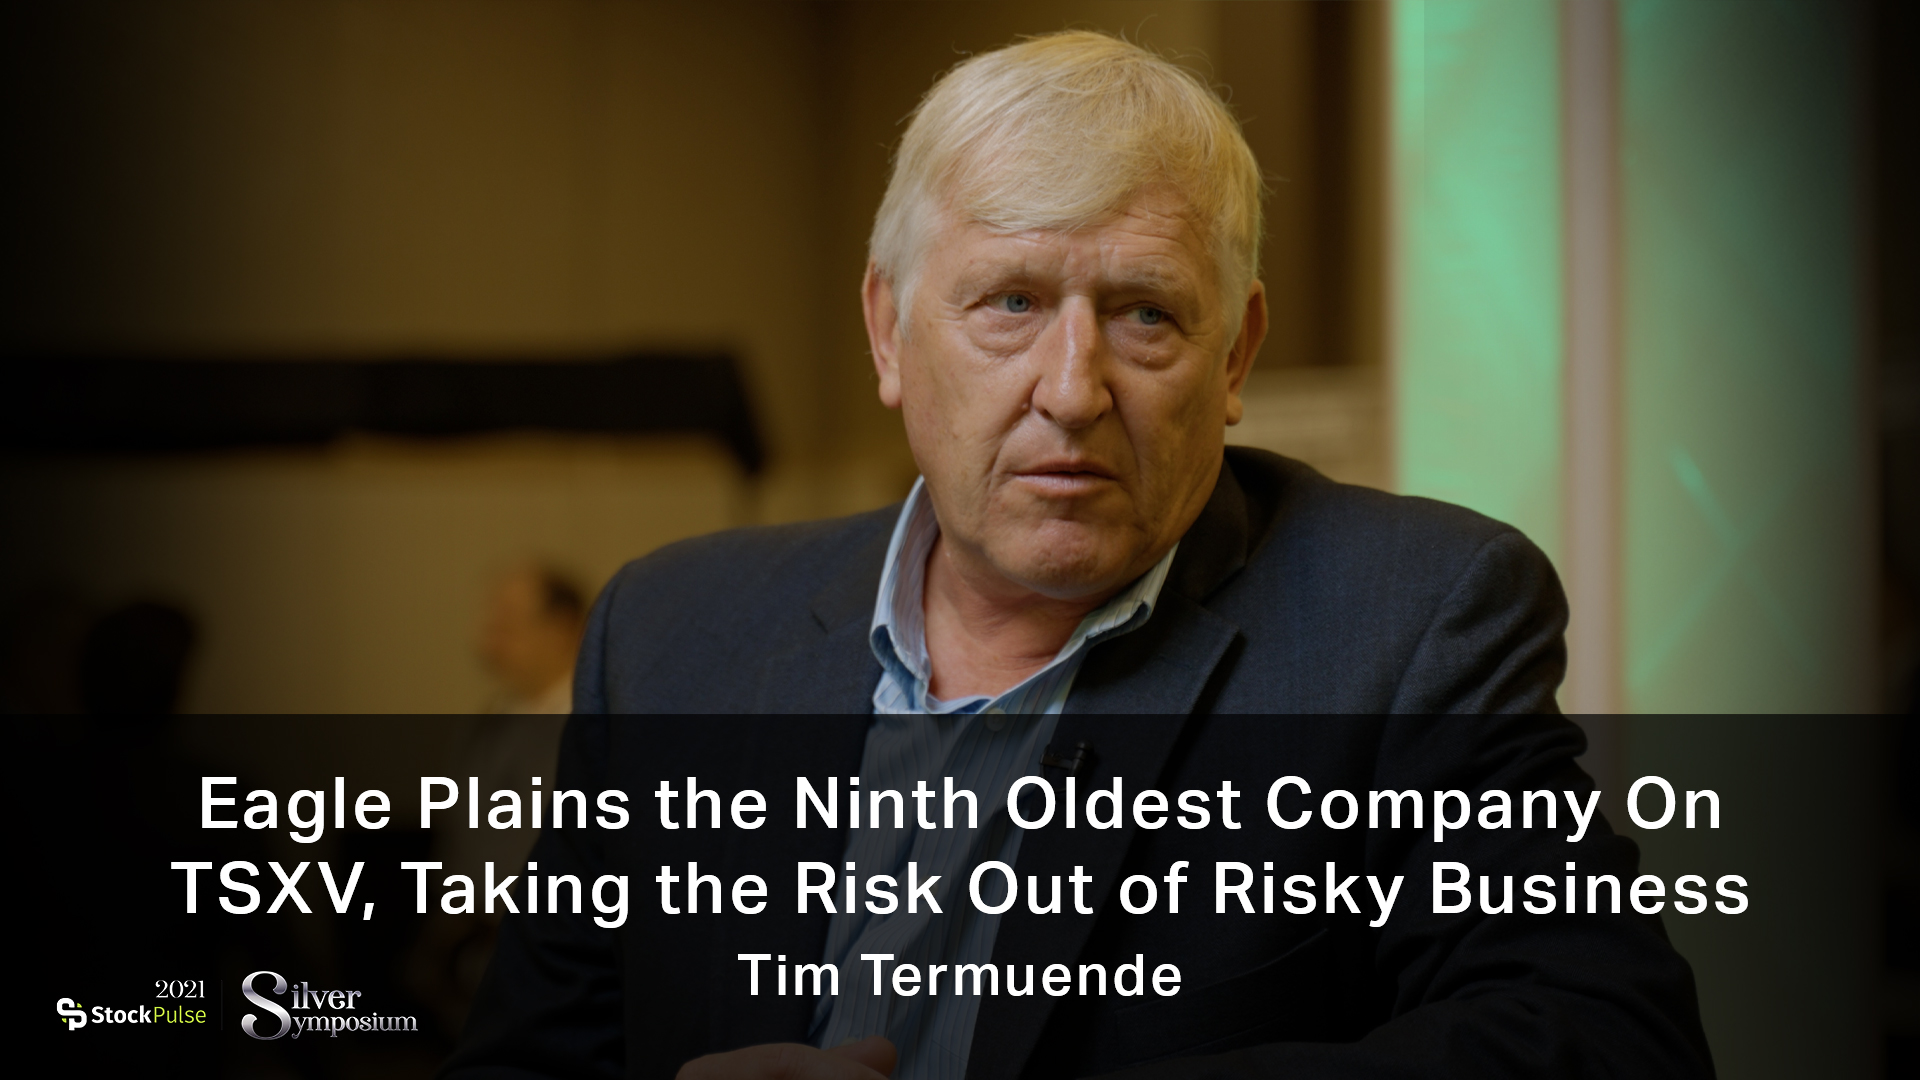 Tim Termuende: Eagle Plains the Ninth Oldest Company On TSXV, Taking the Risk Out of Risky Business